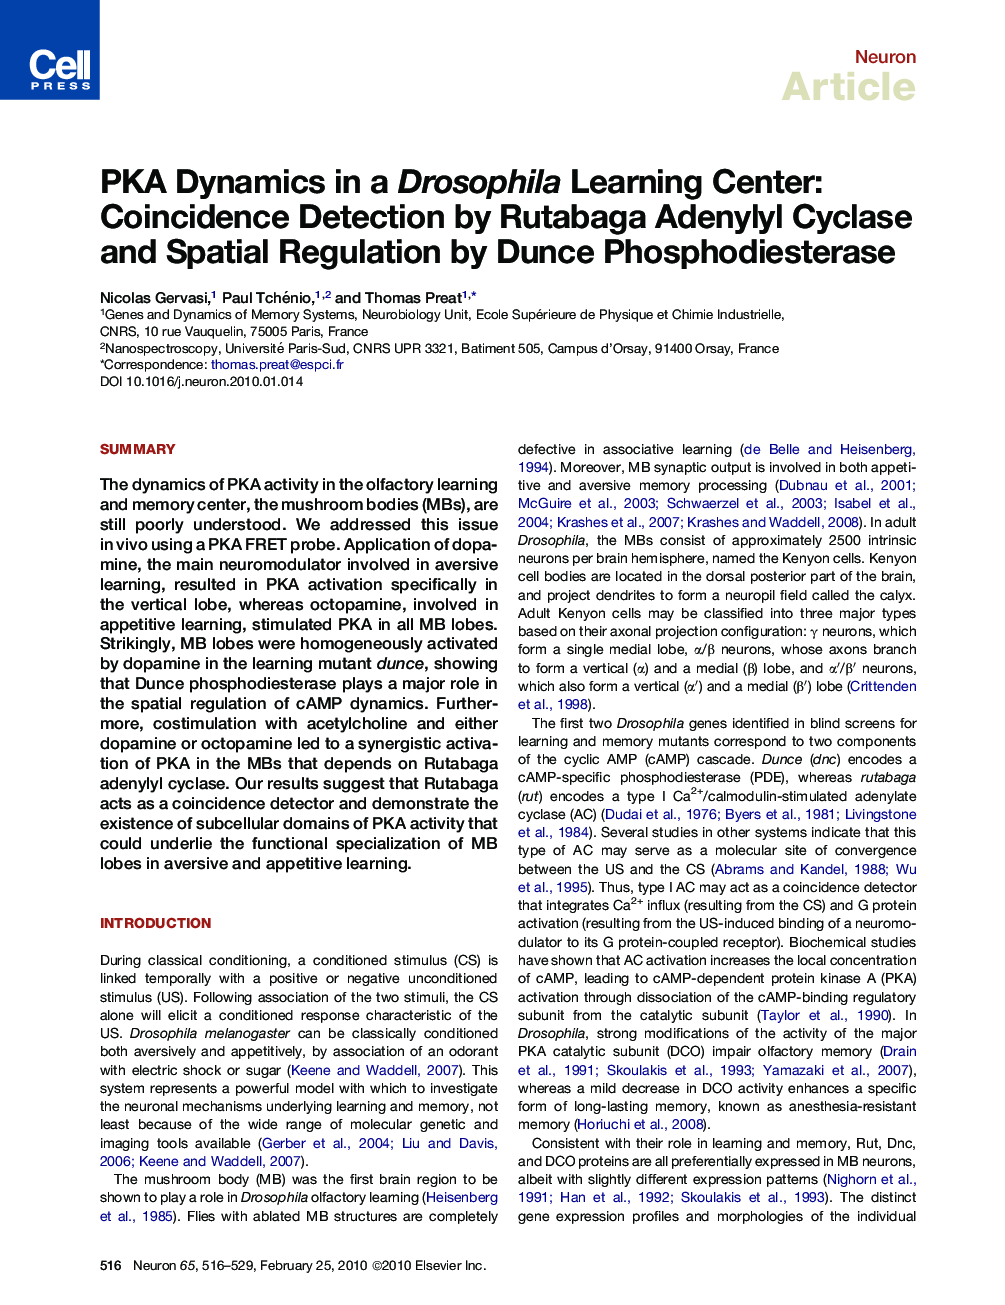 PKA Dynamics in a Drosophila Learning Center: Coincidence Detection by Rutabaga Adenylyl Cyclase and Spatial Regulation by Dunce Phosphodiesterase